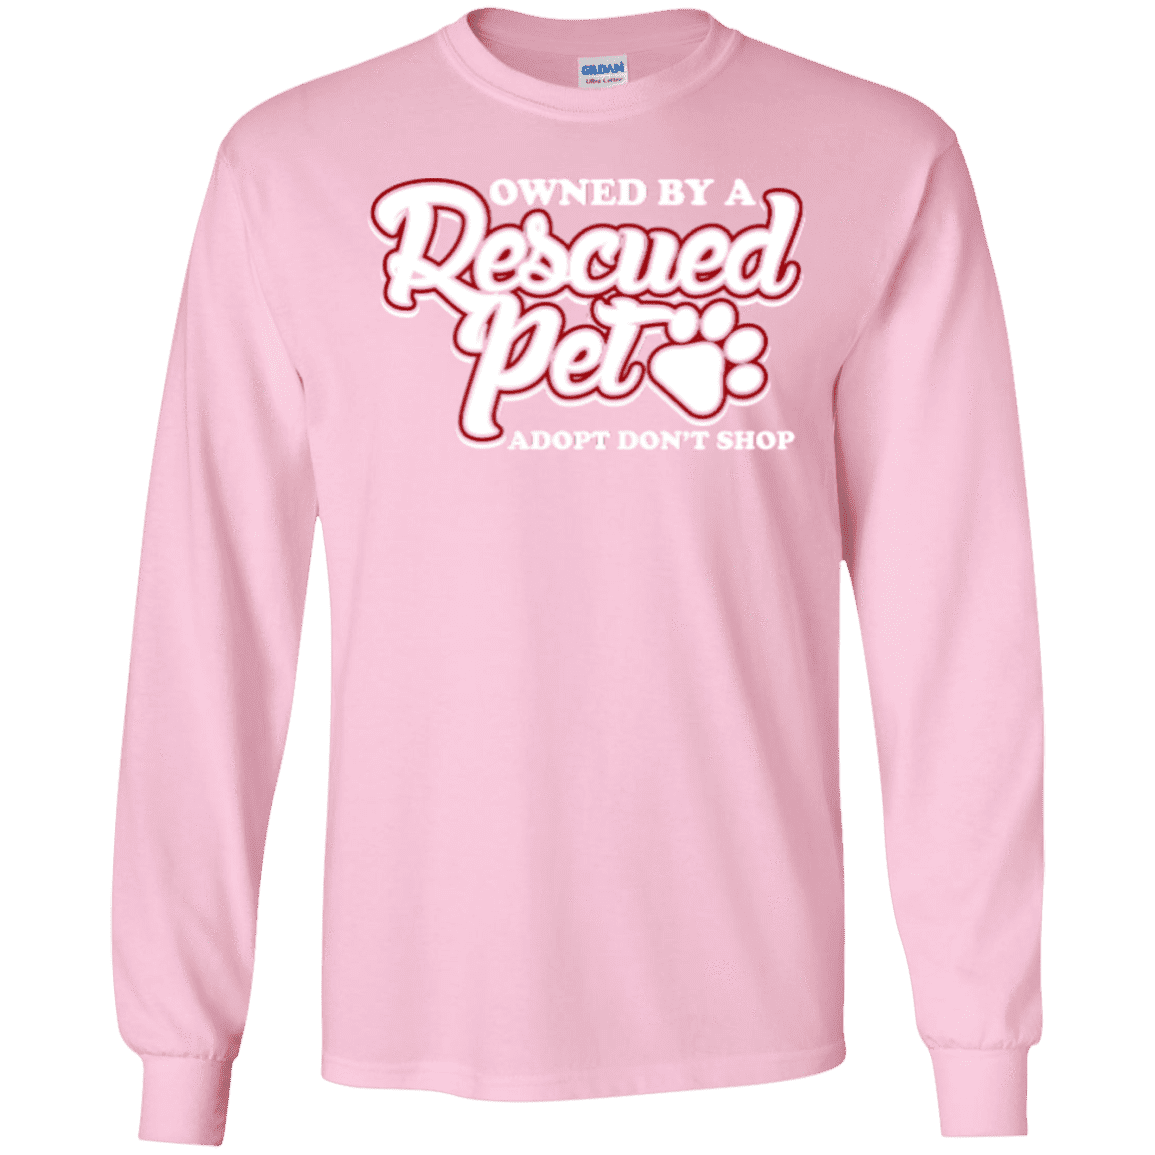 Owned By A Rescued Pet - Long Sleeve T Shirt.